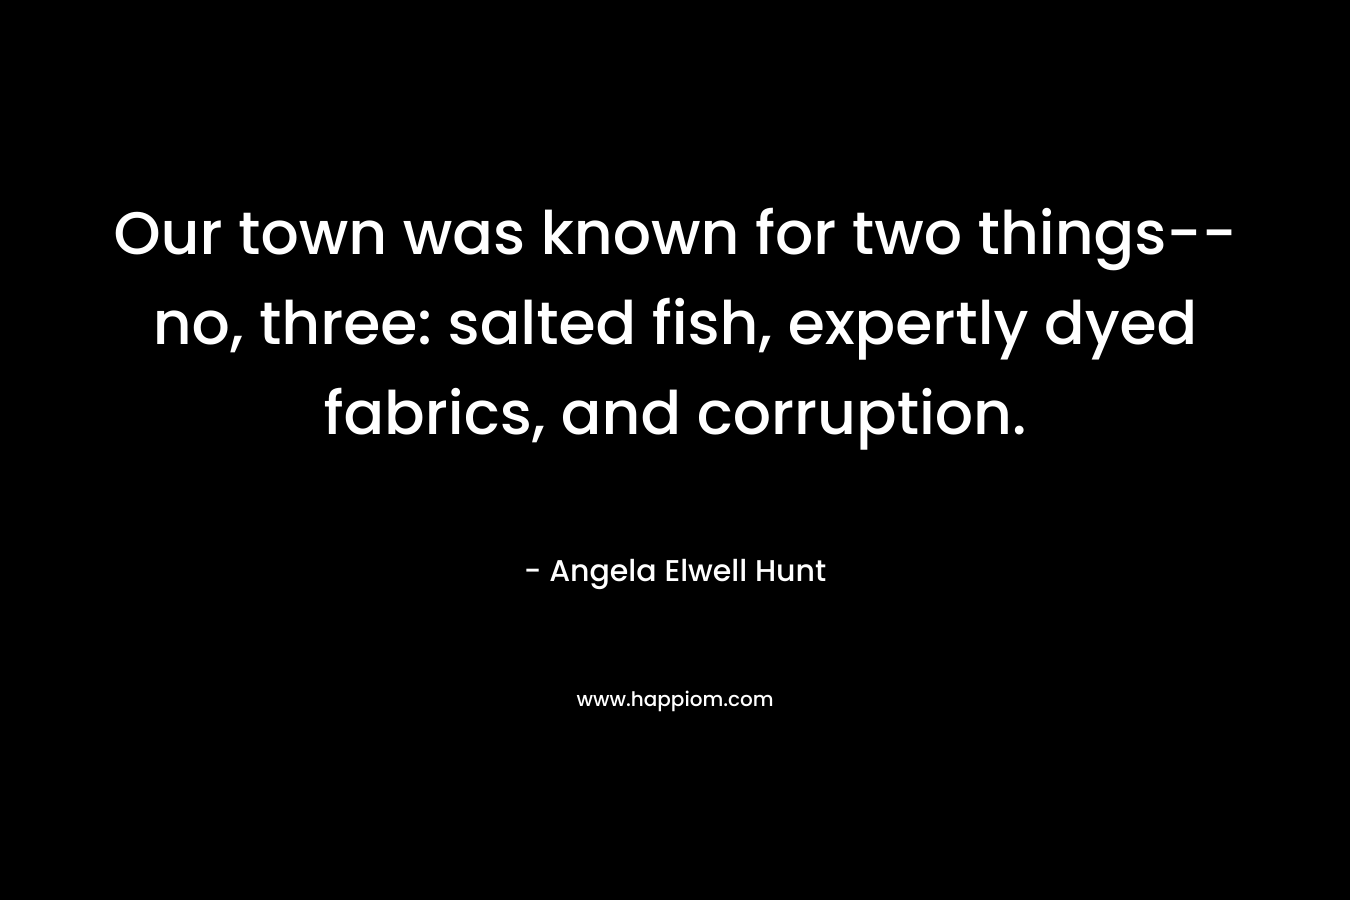 Our town was known for two things–no, three: salted fish, expertly dyed fabrics, and corruption. – Angela Elwell Hunt